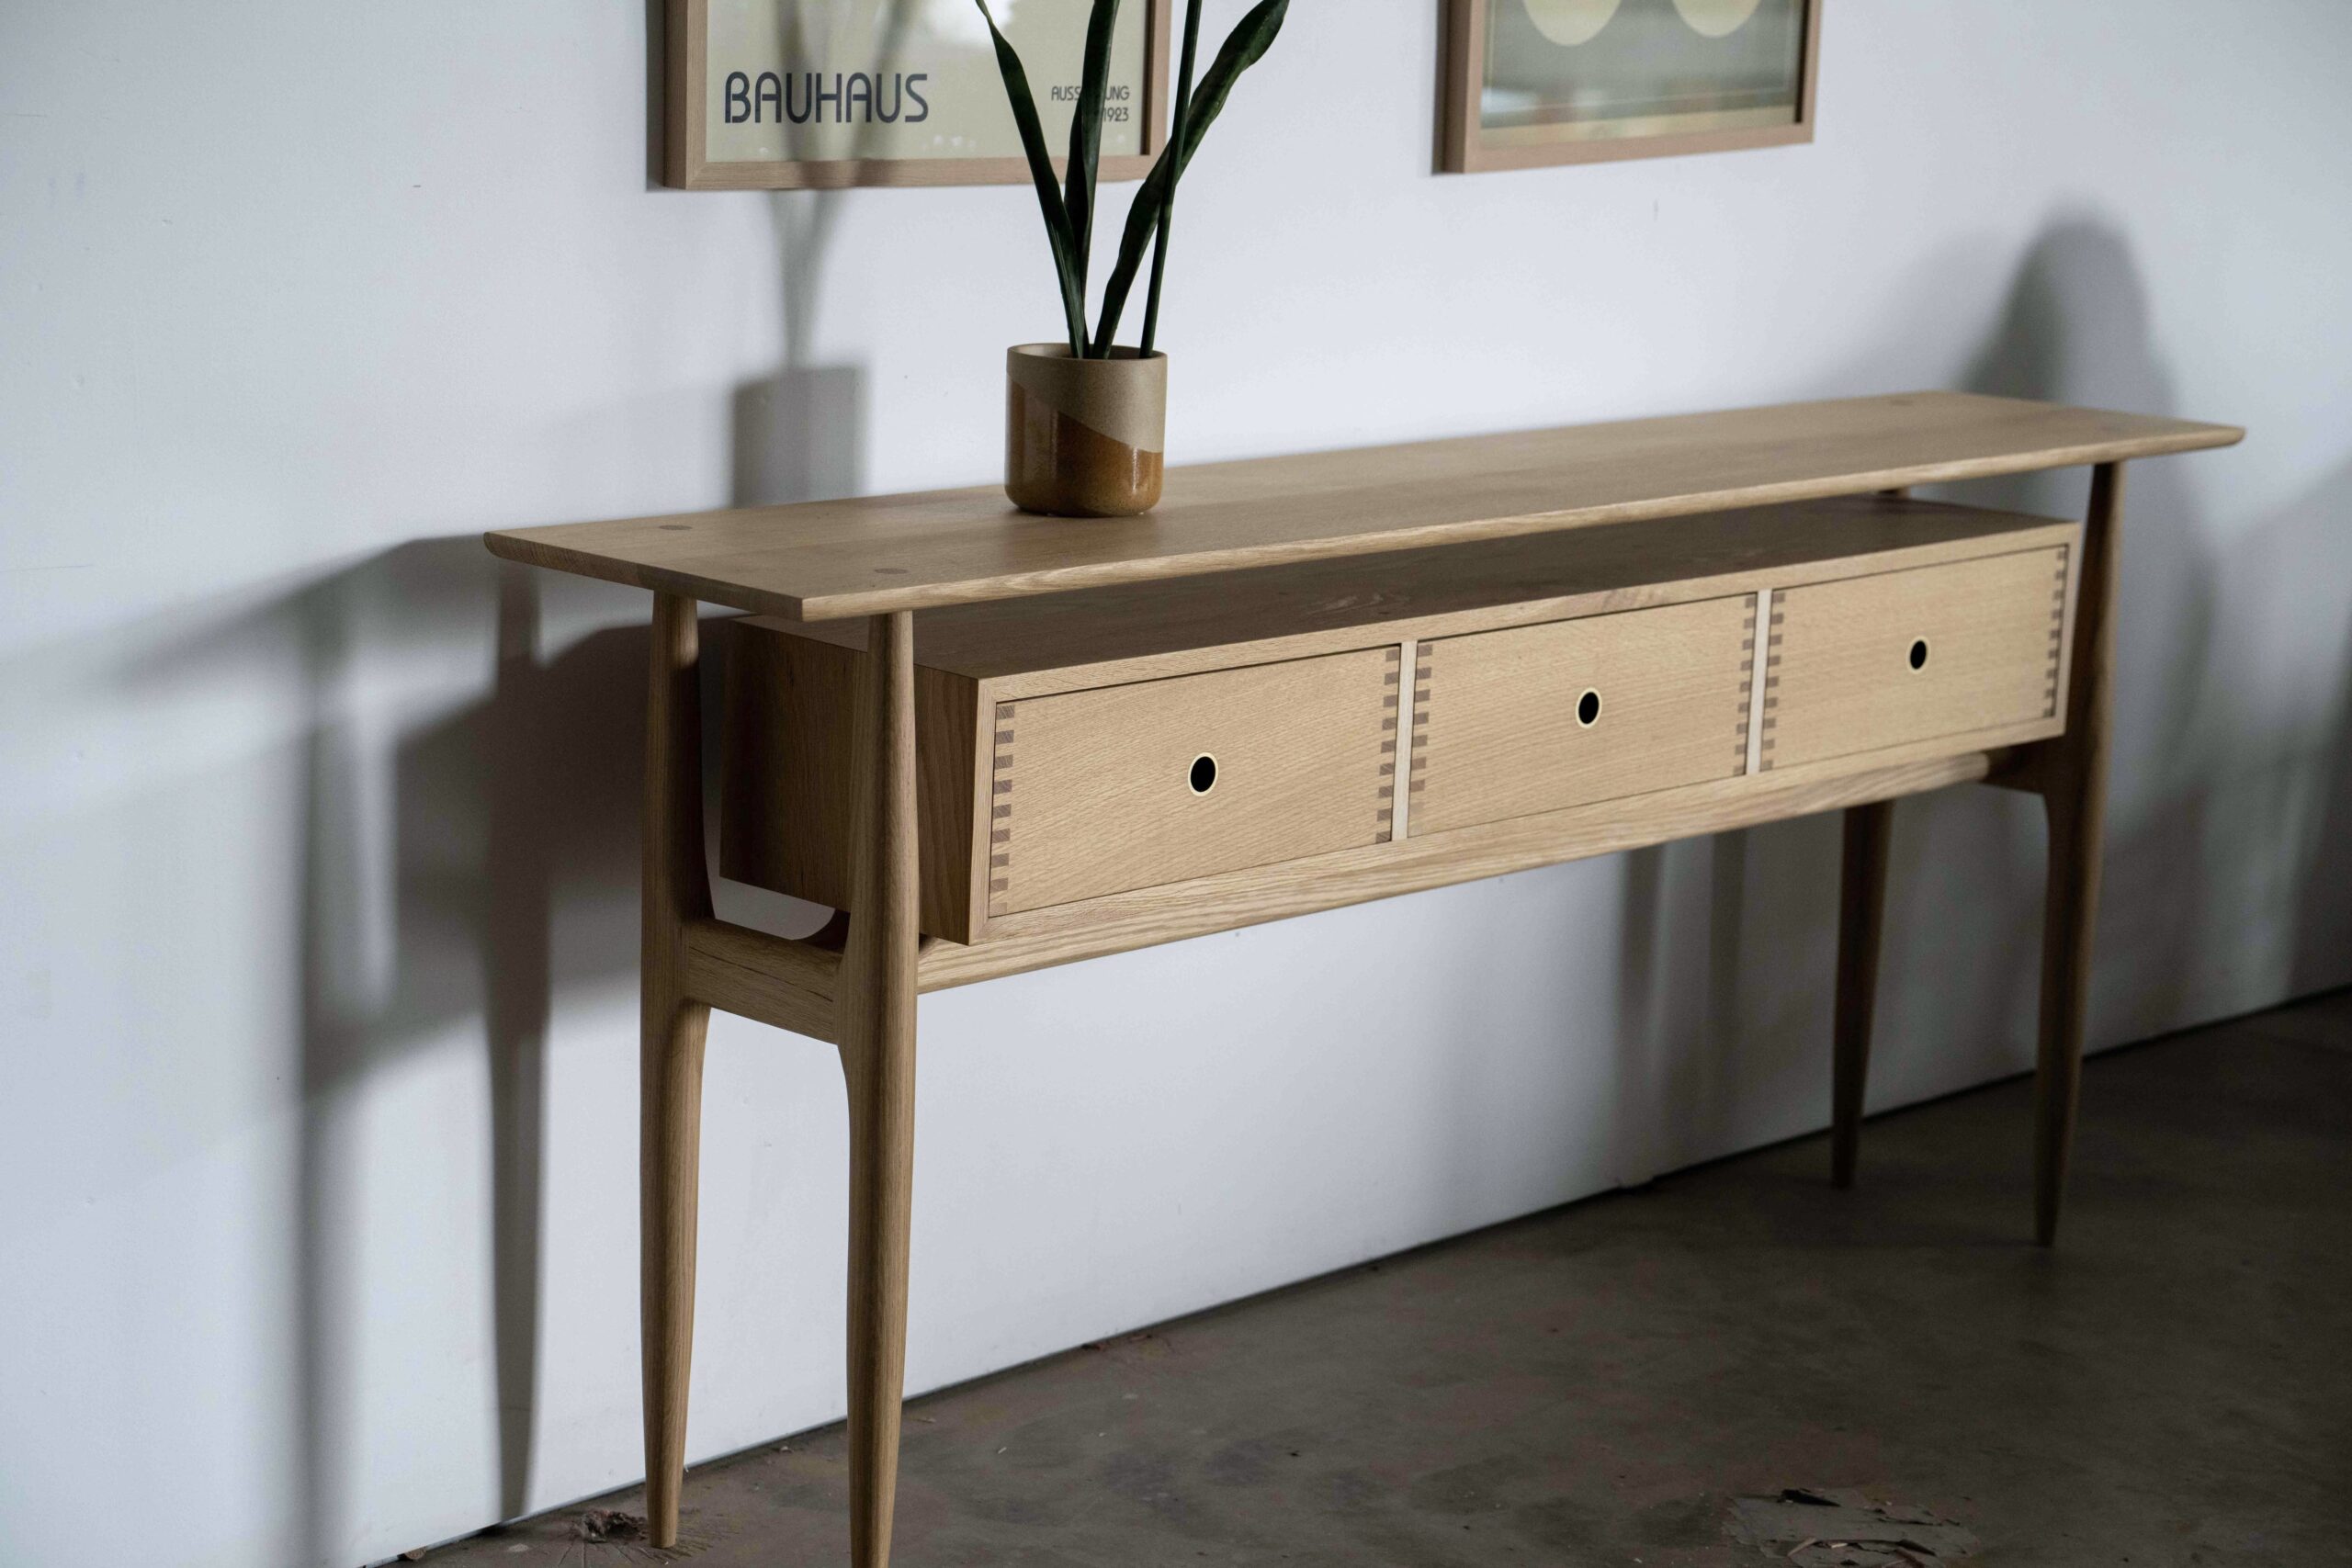 A narrow midcentury modern entry table made of white oak with three drawers.